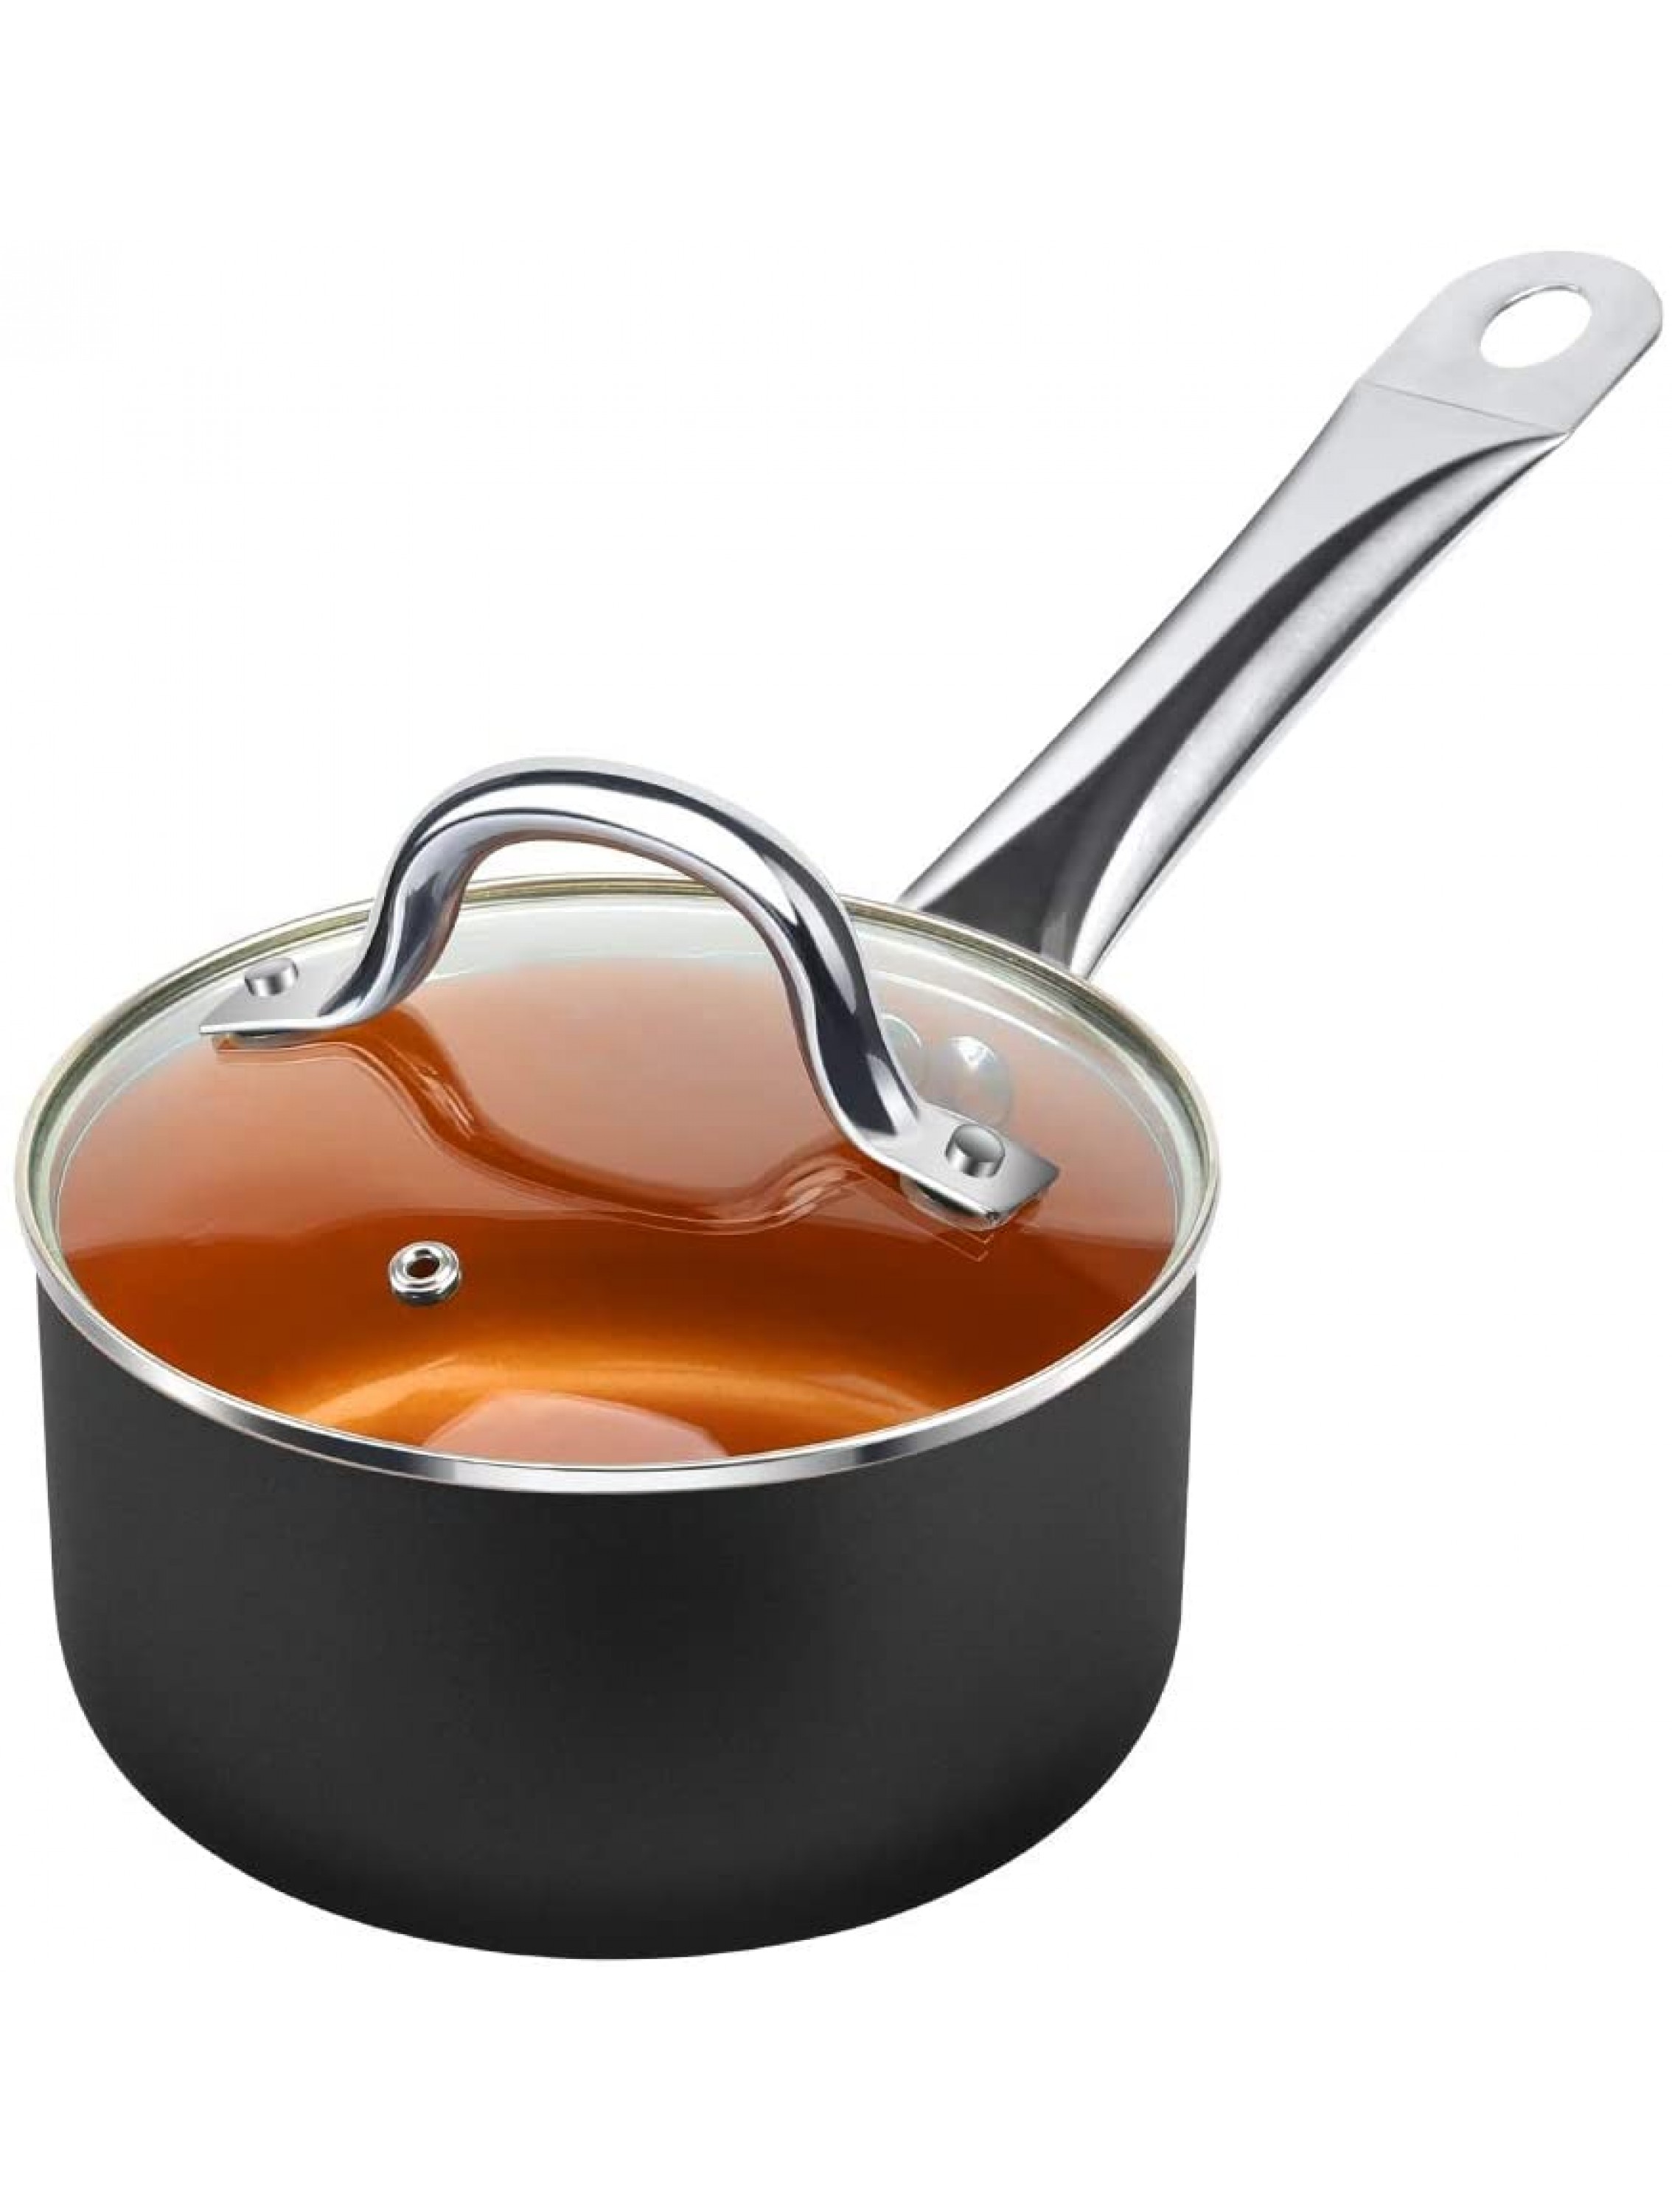 SHINEURI 1.5 qt. Copper Nonstick Saucepan Ceramic Mini Saute Pan with Lid for Induction Gas, Electric & Stovetops Perfect for 1 Person Meal Black - BMUDH1VY3